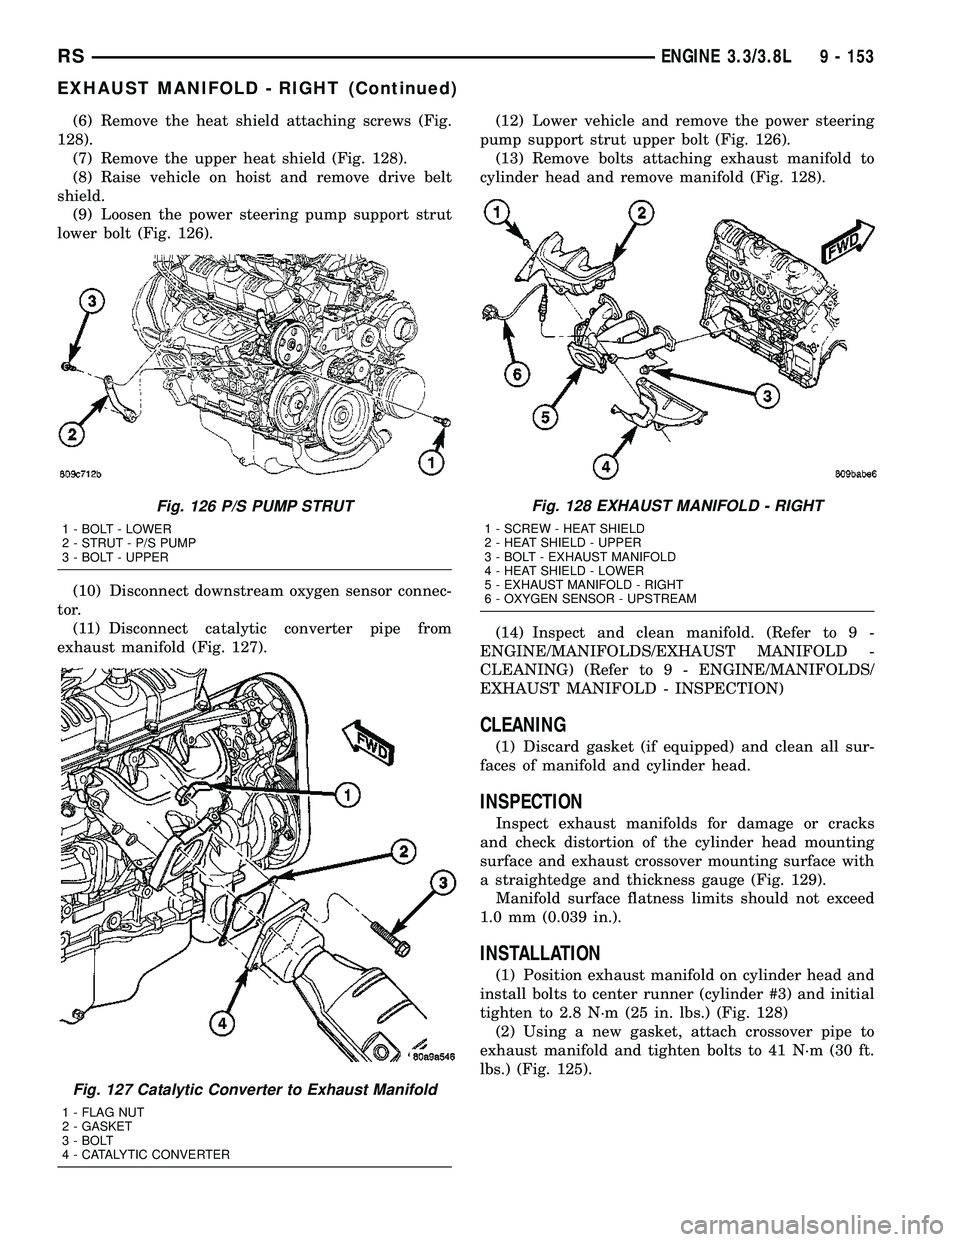 CHRYSLER VOYAGER 2005  Service Manual (6) Remove the heat shield attaching screws (Fig.
128).
(7) Remove the upper heat shield (Fig. 128).
(8) Raise vehicle on hoist and remove drive belt
shield.
(9) Loosen the power steering pump support